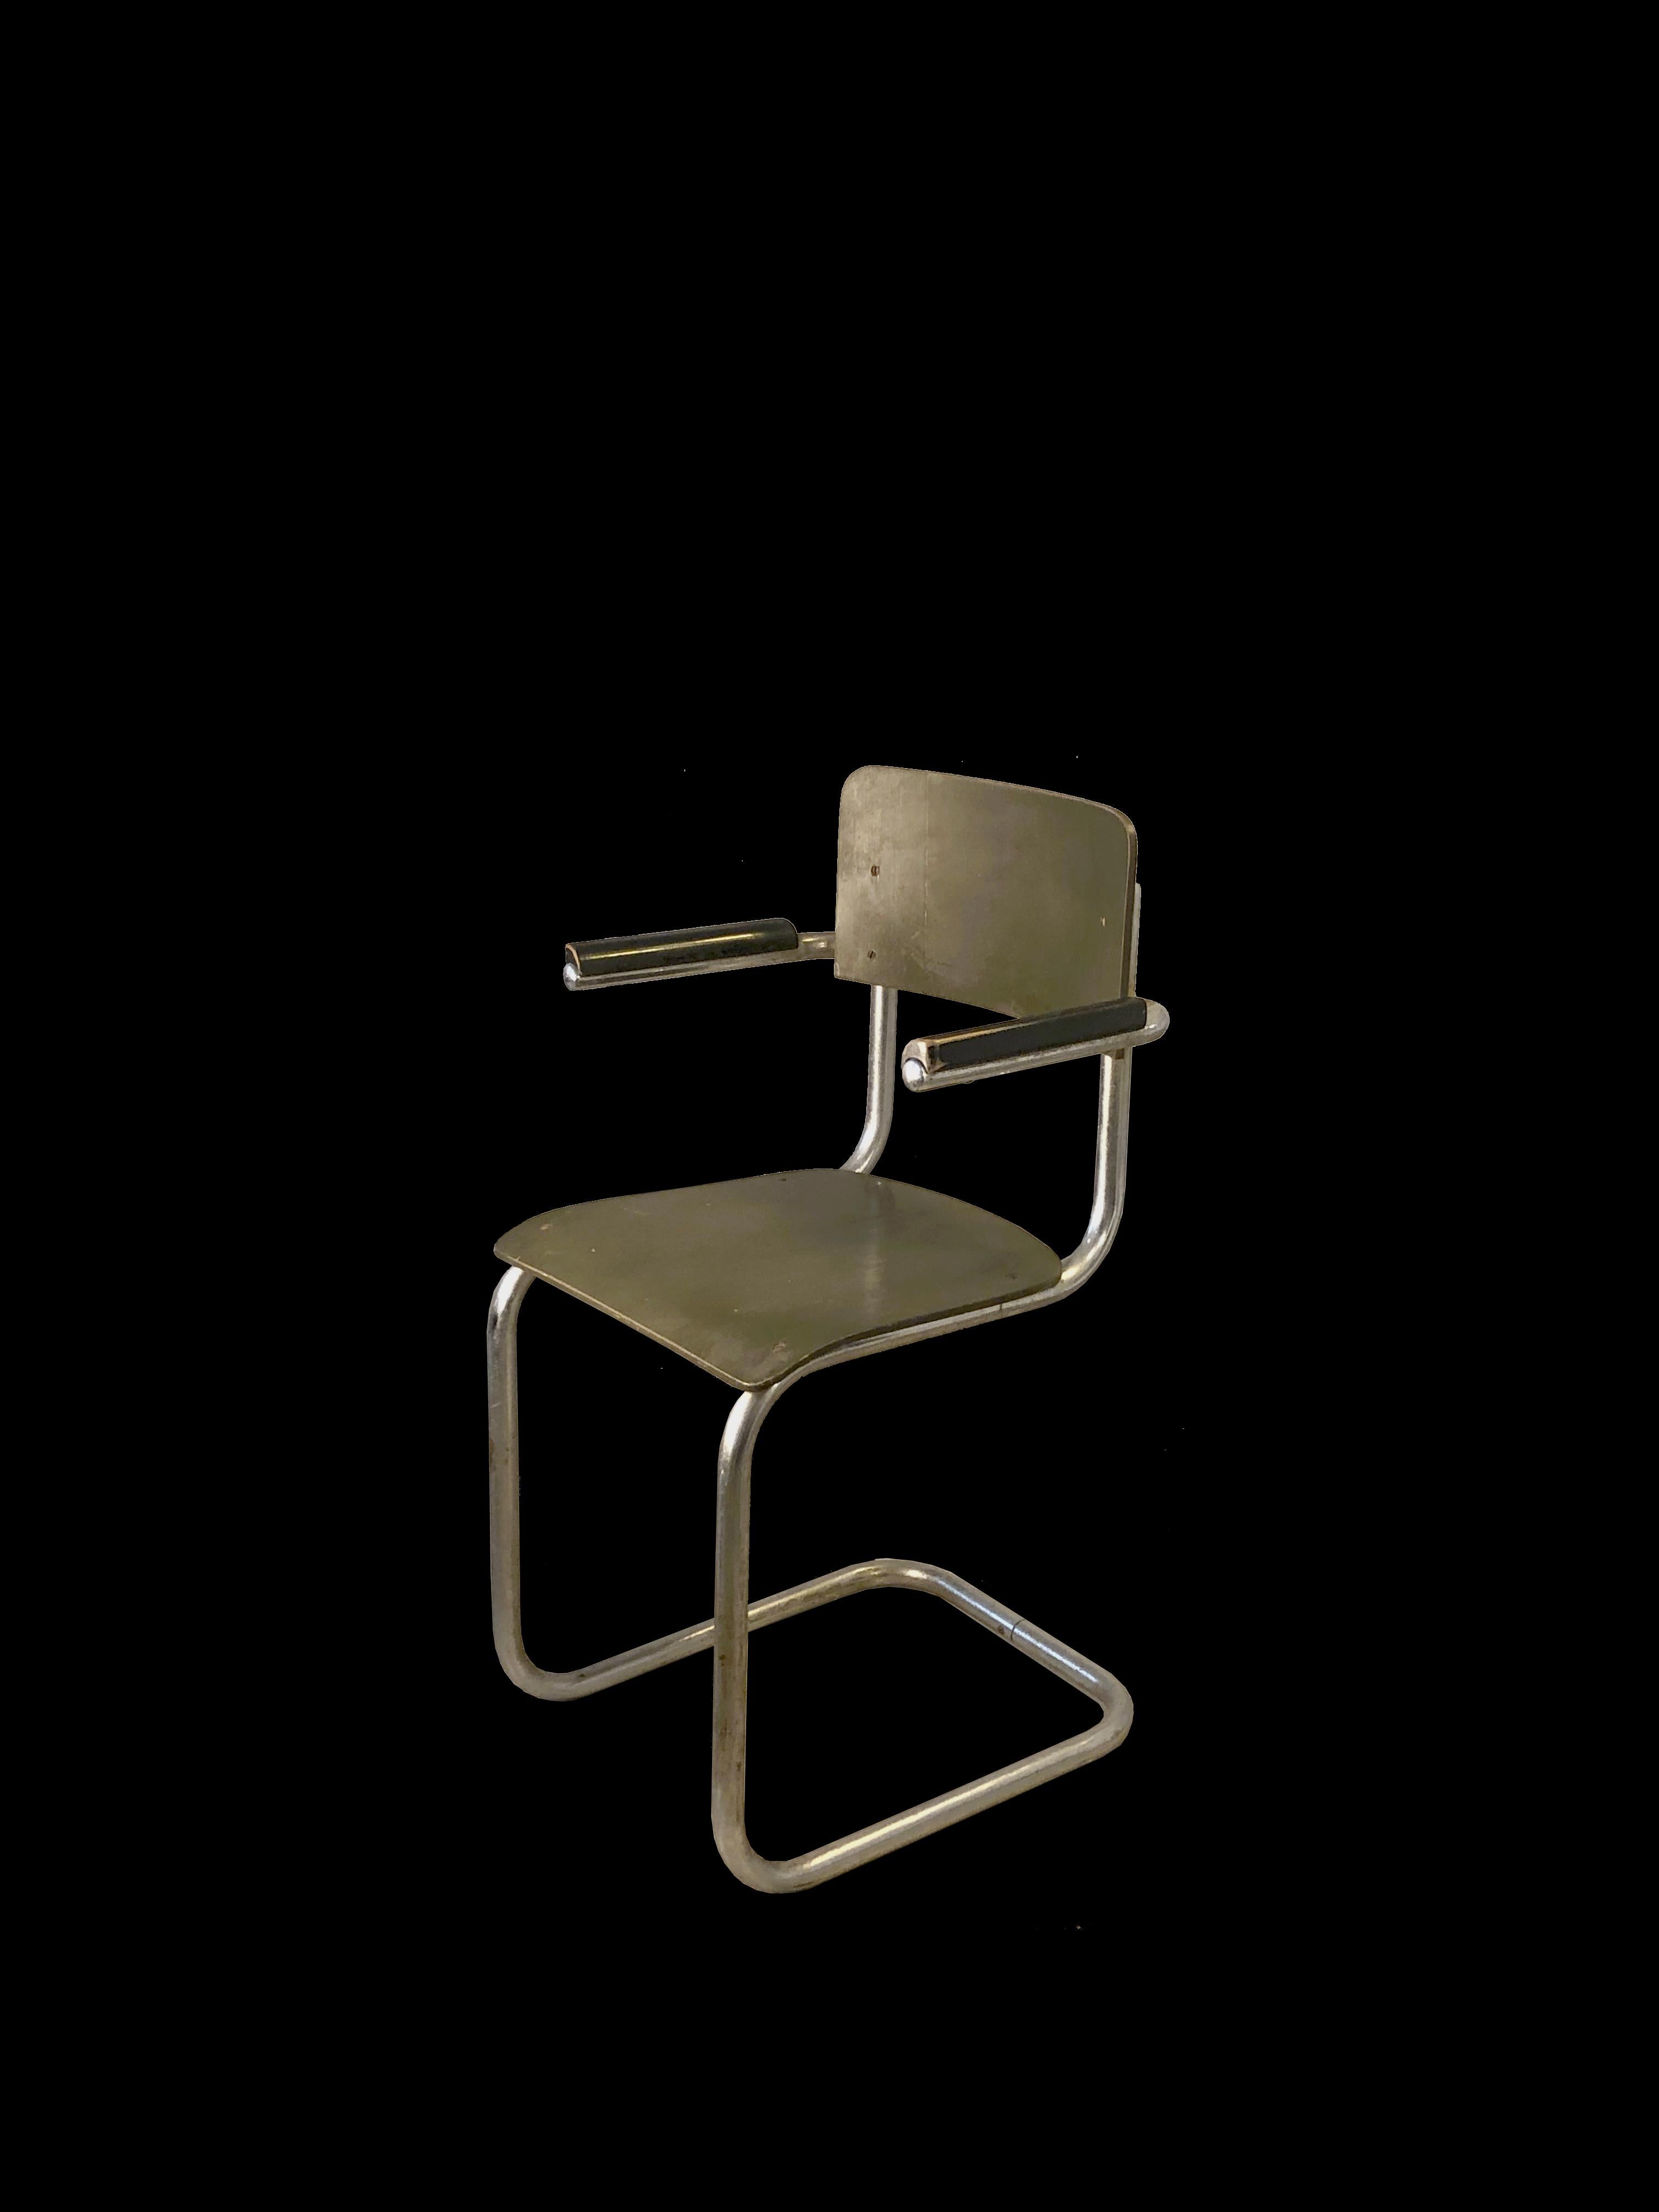 An Early MODERNIST BAUHAUS CHAIR by MART STAM for MAUSER WERKE, Germany 1930 For Sale 4